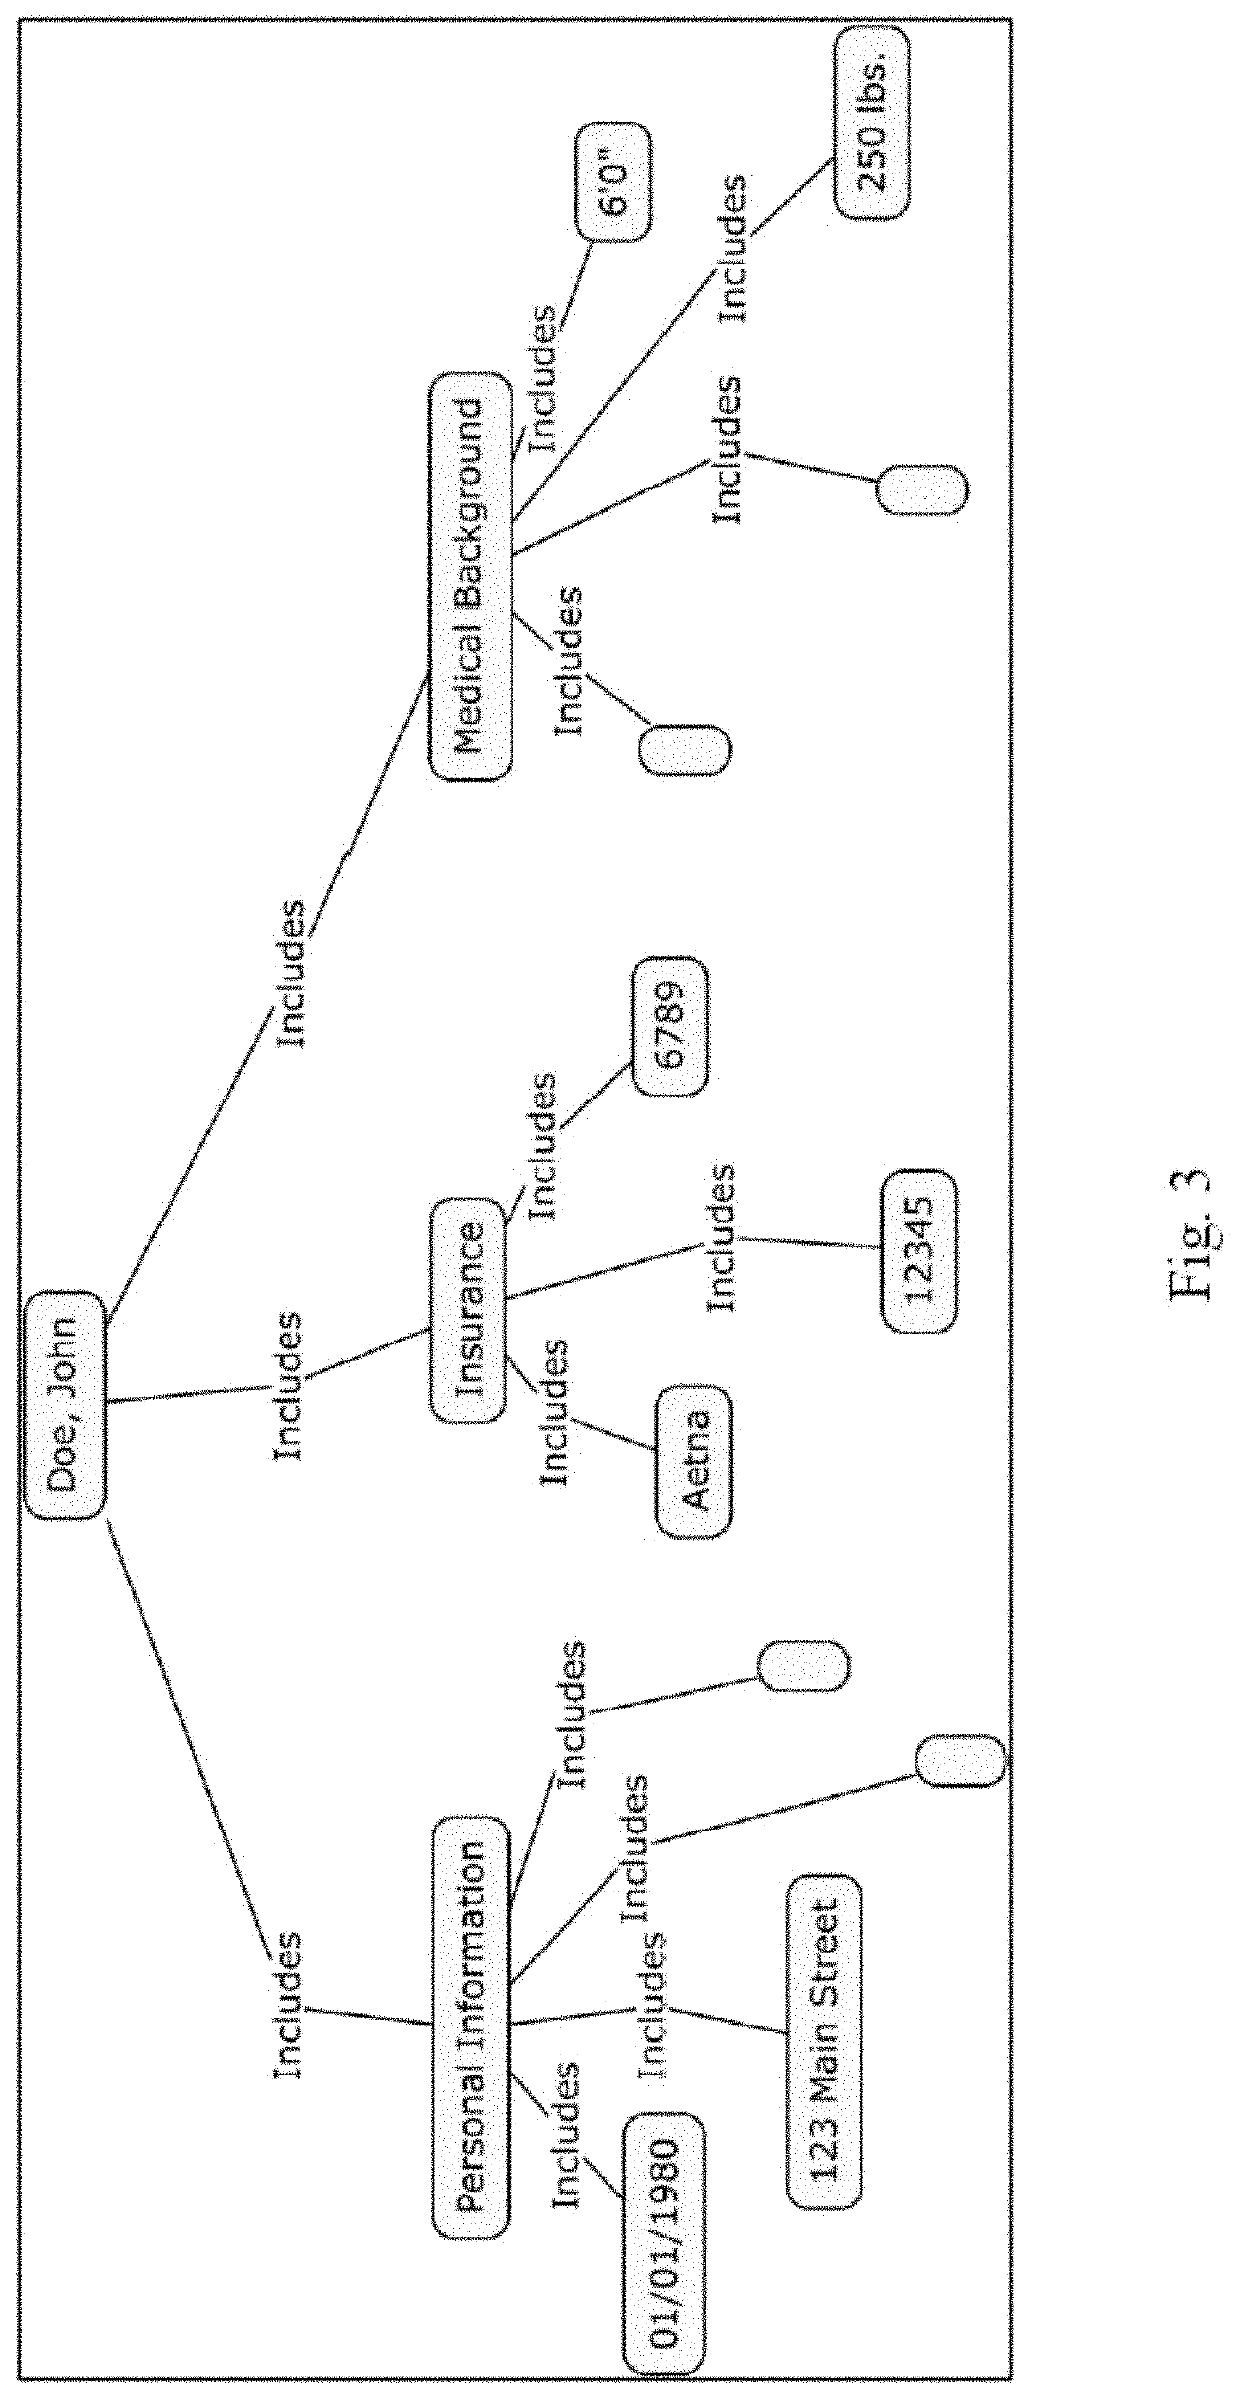 Method and System for Managing Chronic Illness Health Care Records